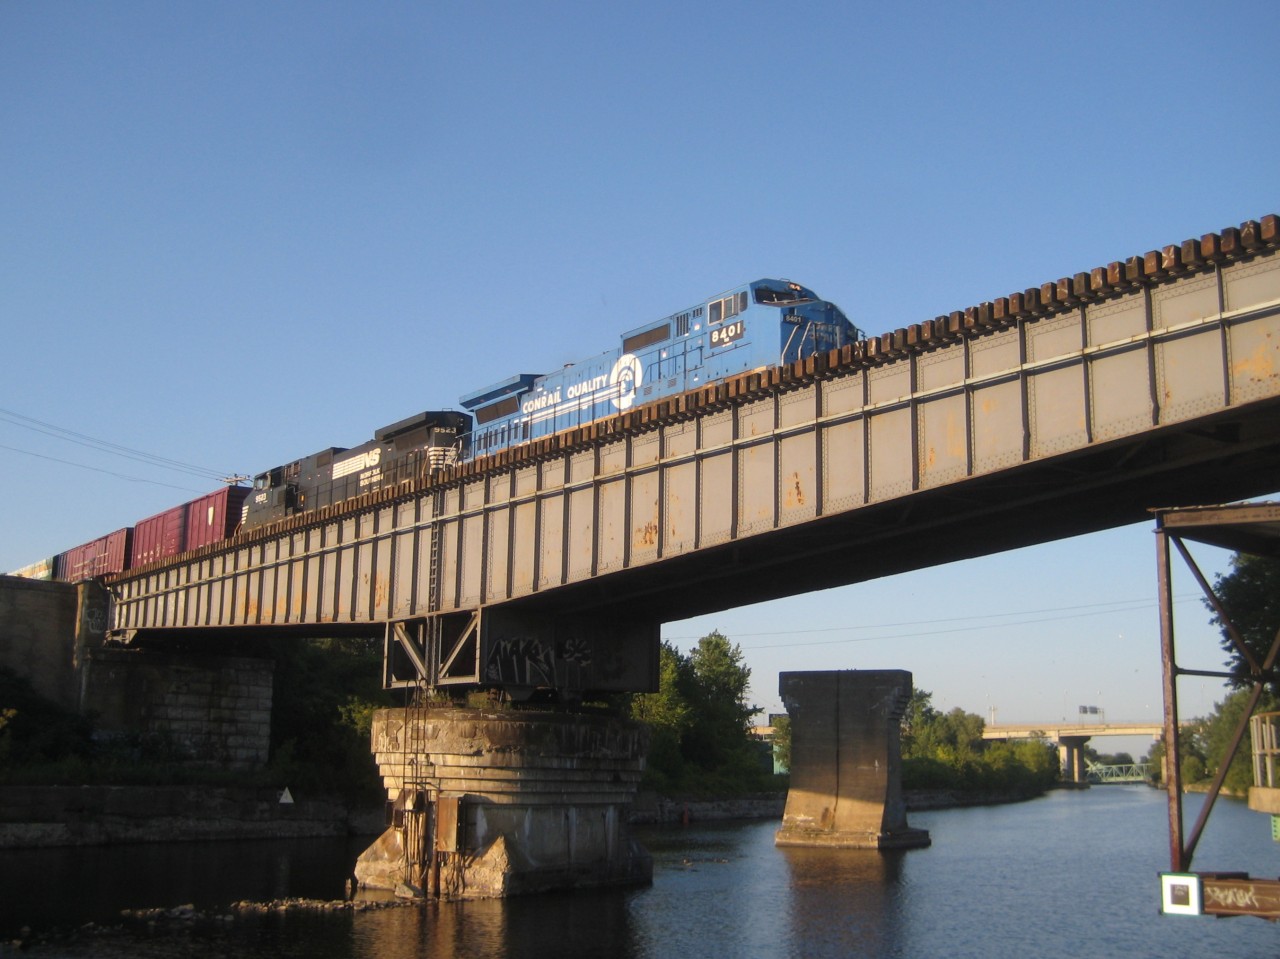 Big Blue over the Lachine Canal Long after Conrail had been divided up between CSX and Norfolk Southern, but before they repainted all their ex-Conrail engines, it was still possible to see Conrail painted engines in Montreal. Here we see NS 8401 leading a train southbound over CP's Rockfield bridge. NS 8401 is a Dash8-40CW which was built by GE as CR 6199 in 1993. Trailing unit is NS 9523.